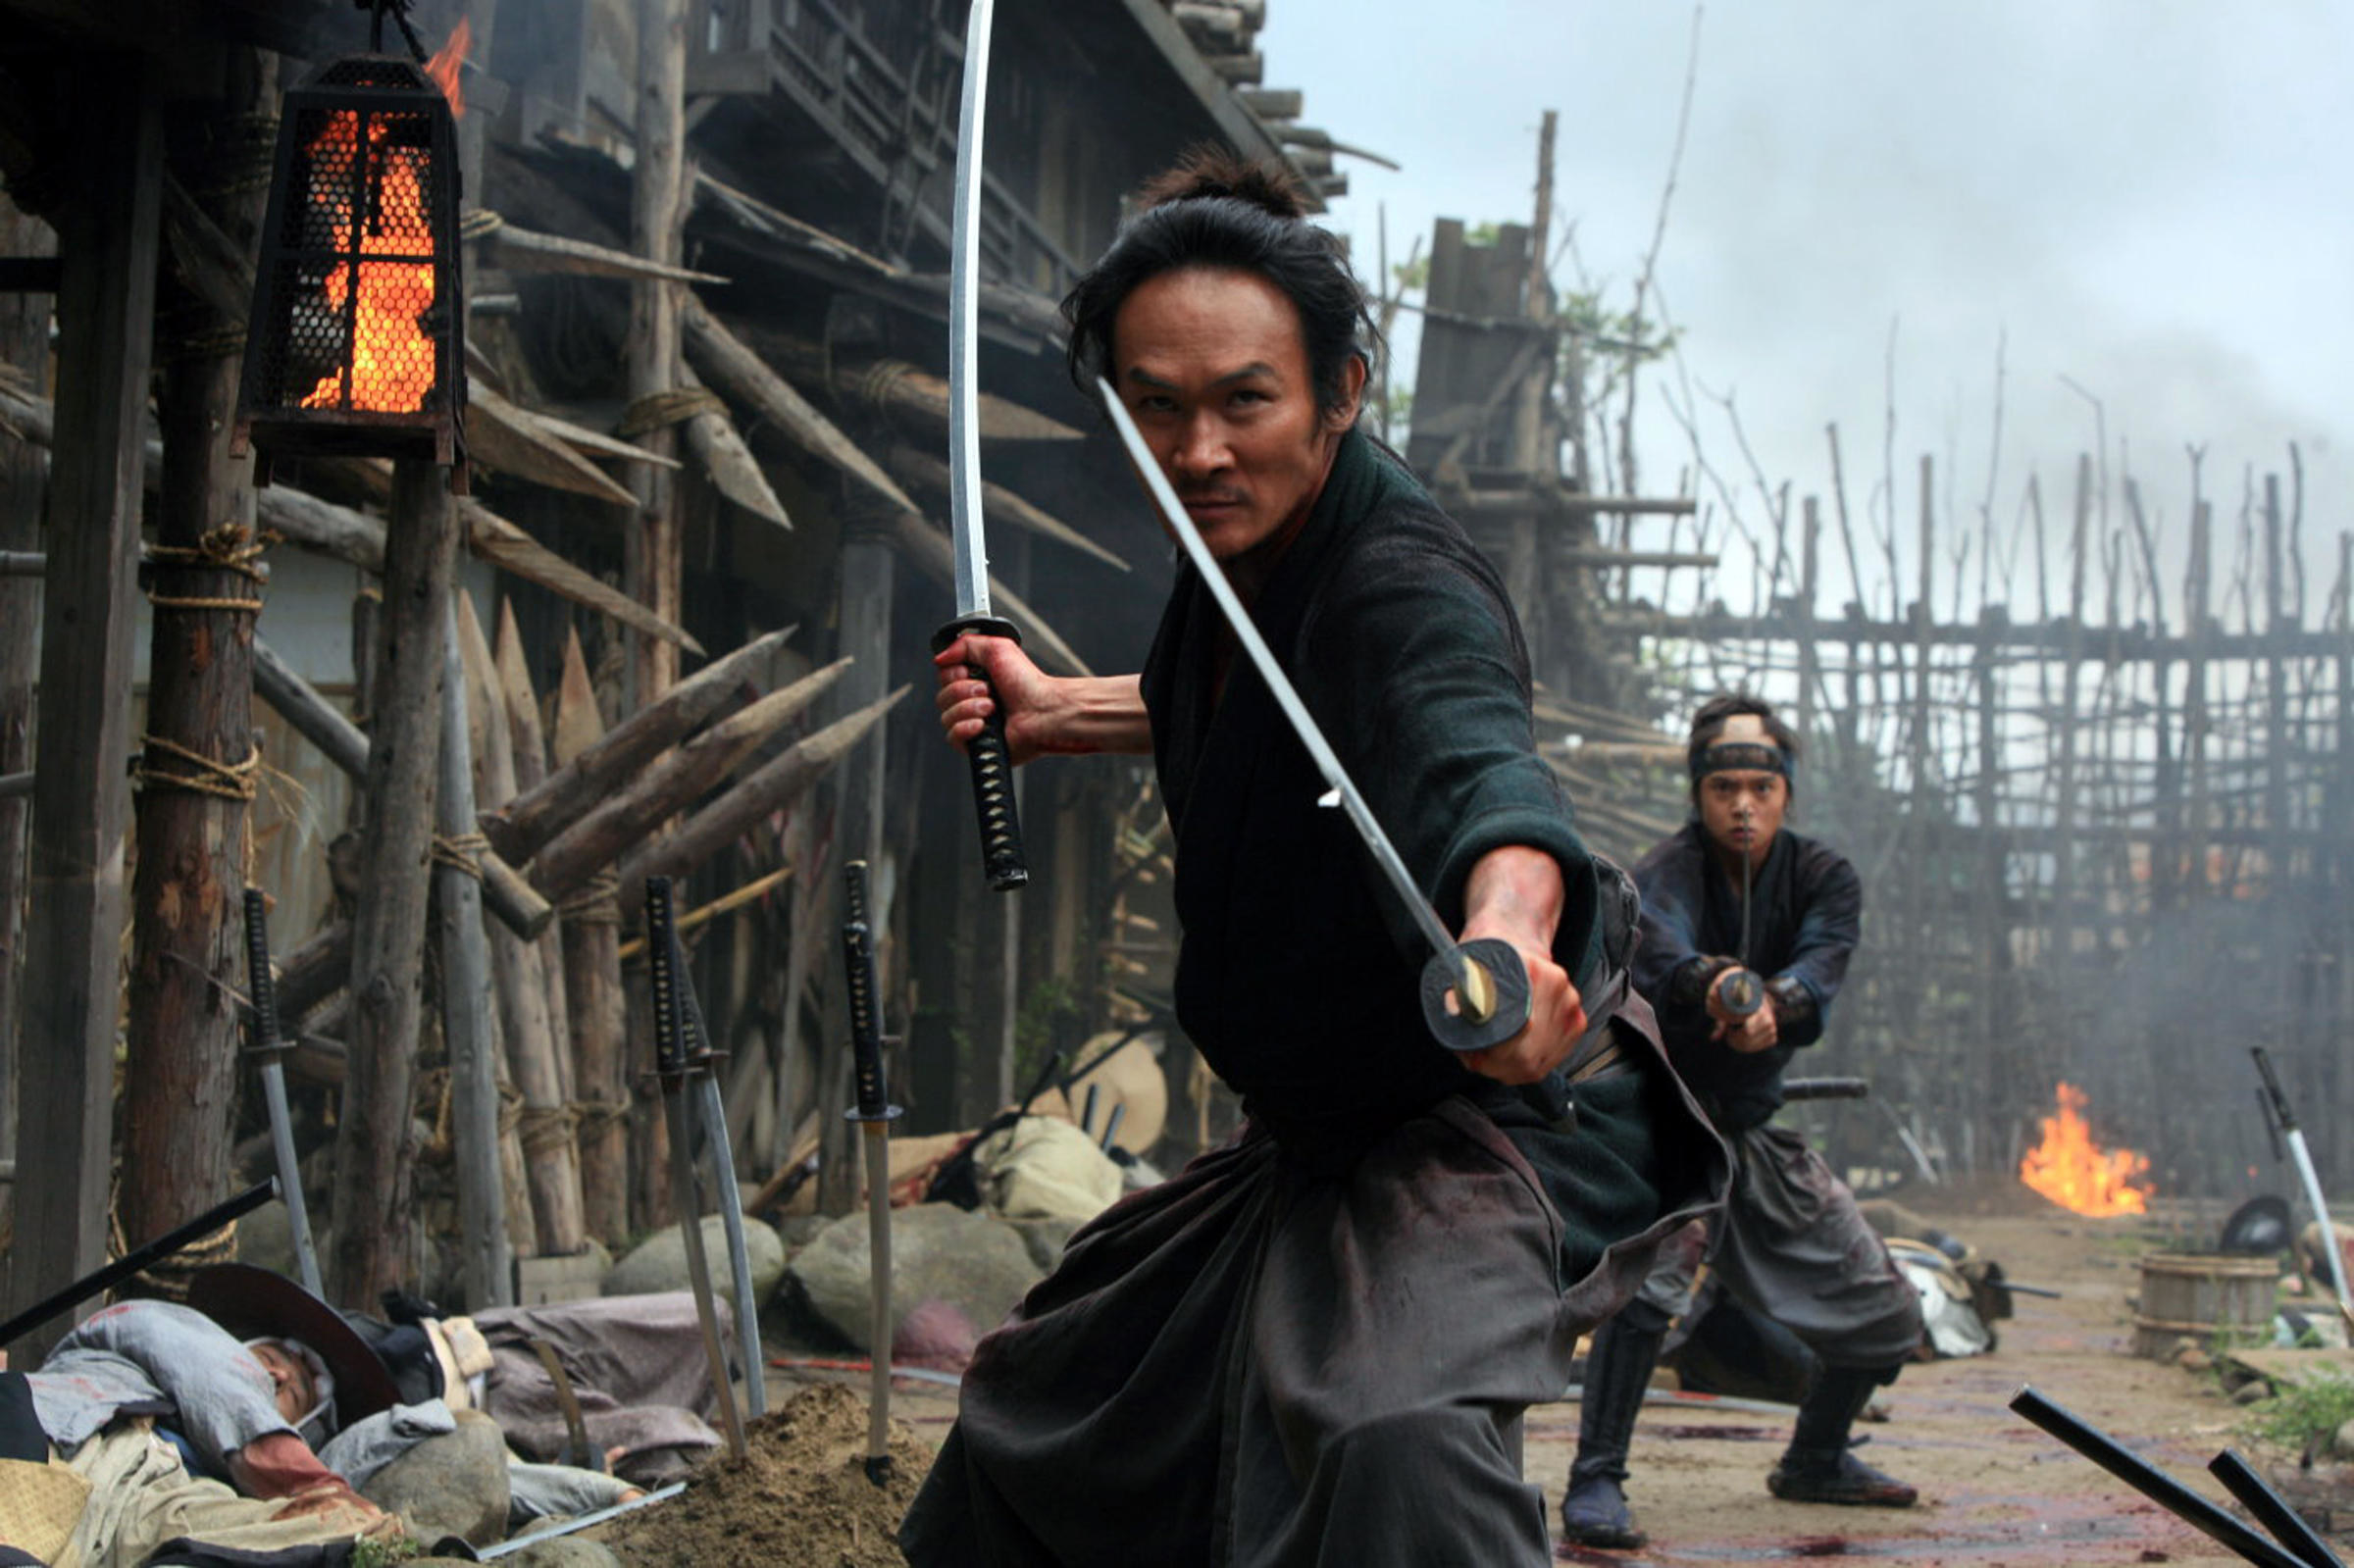 A pair of ronin don their blades at their enemies in a burning village